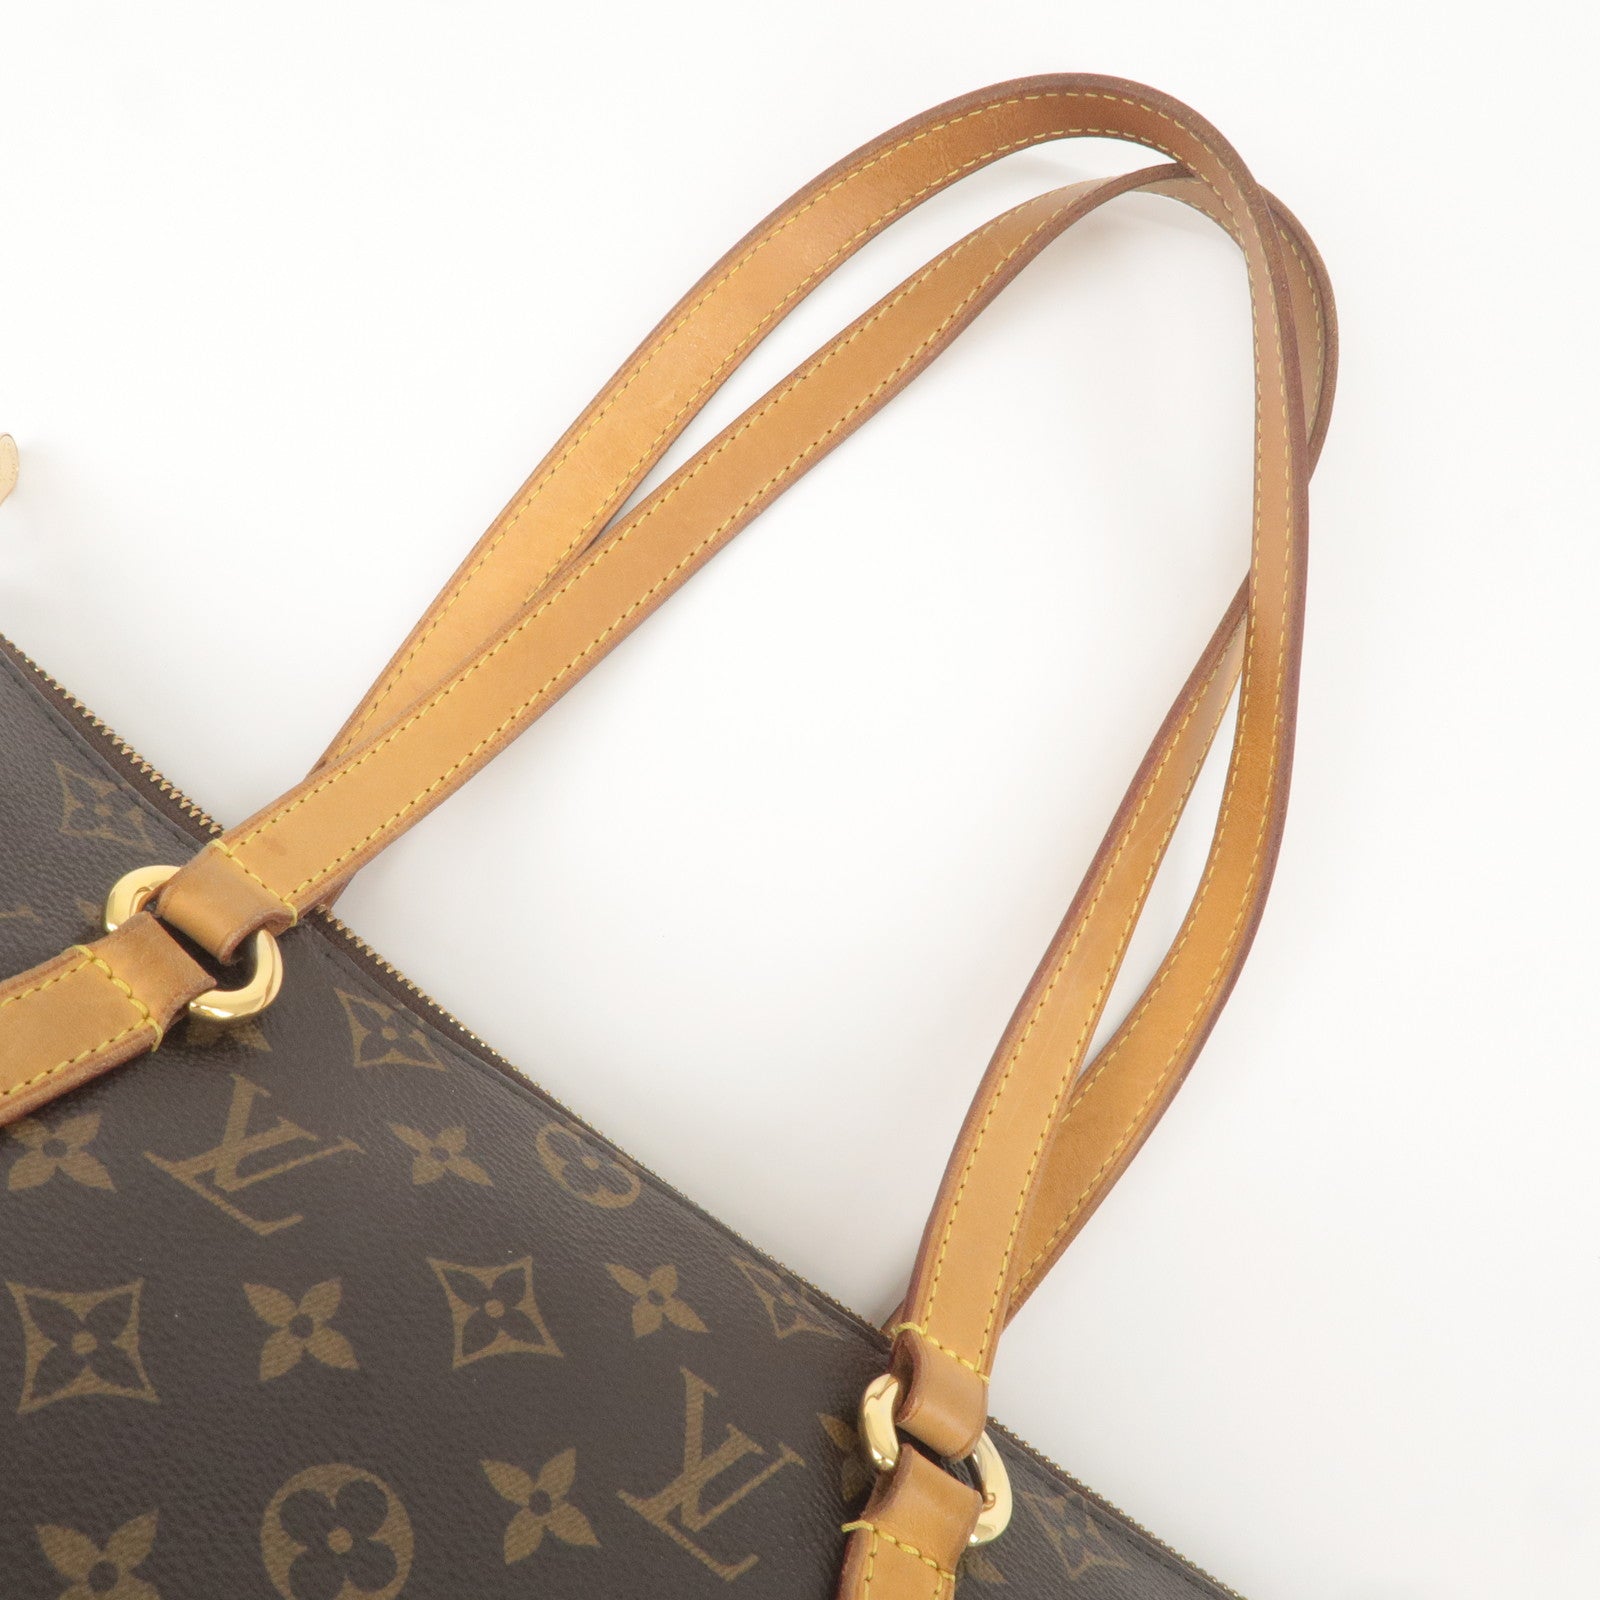 Auth Louis Vuitton Monogram Totally PM Tote Bag Brown M56688 Used